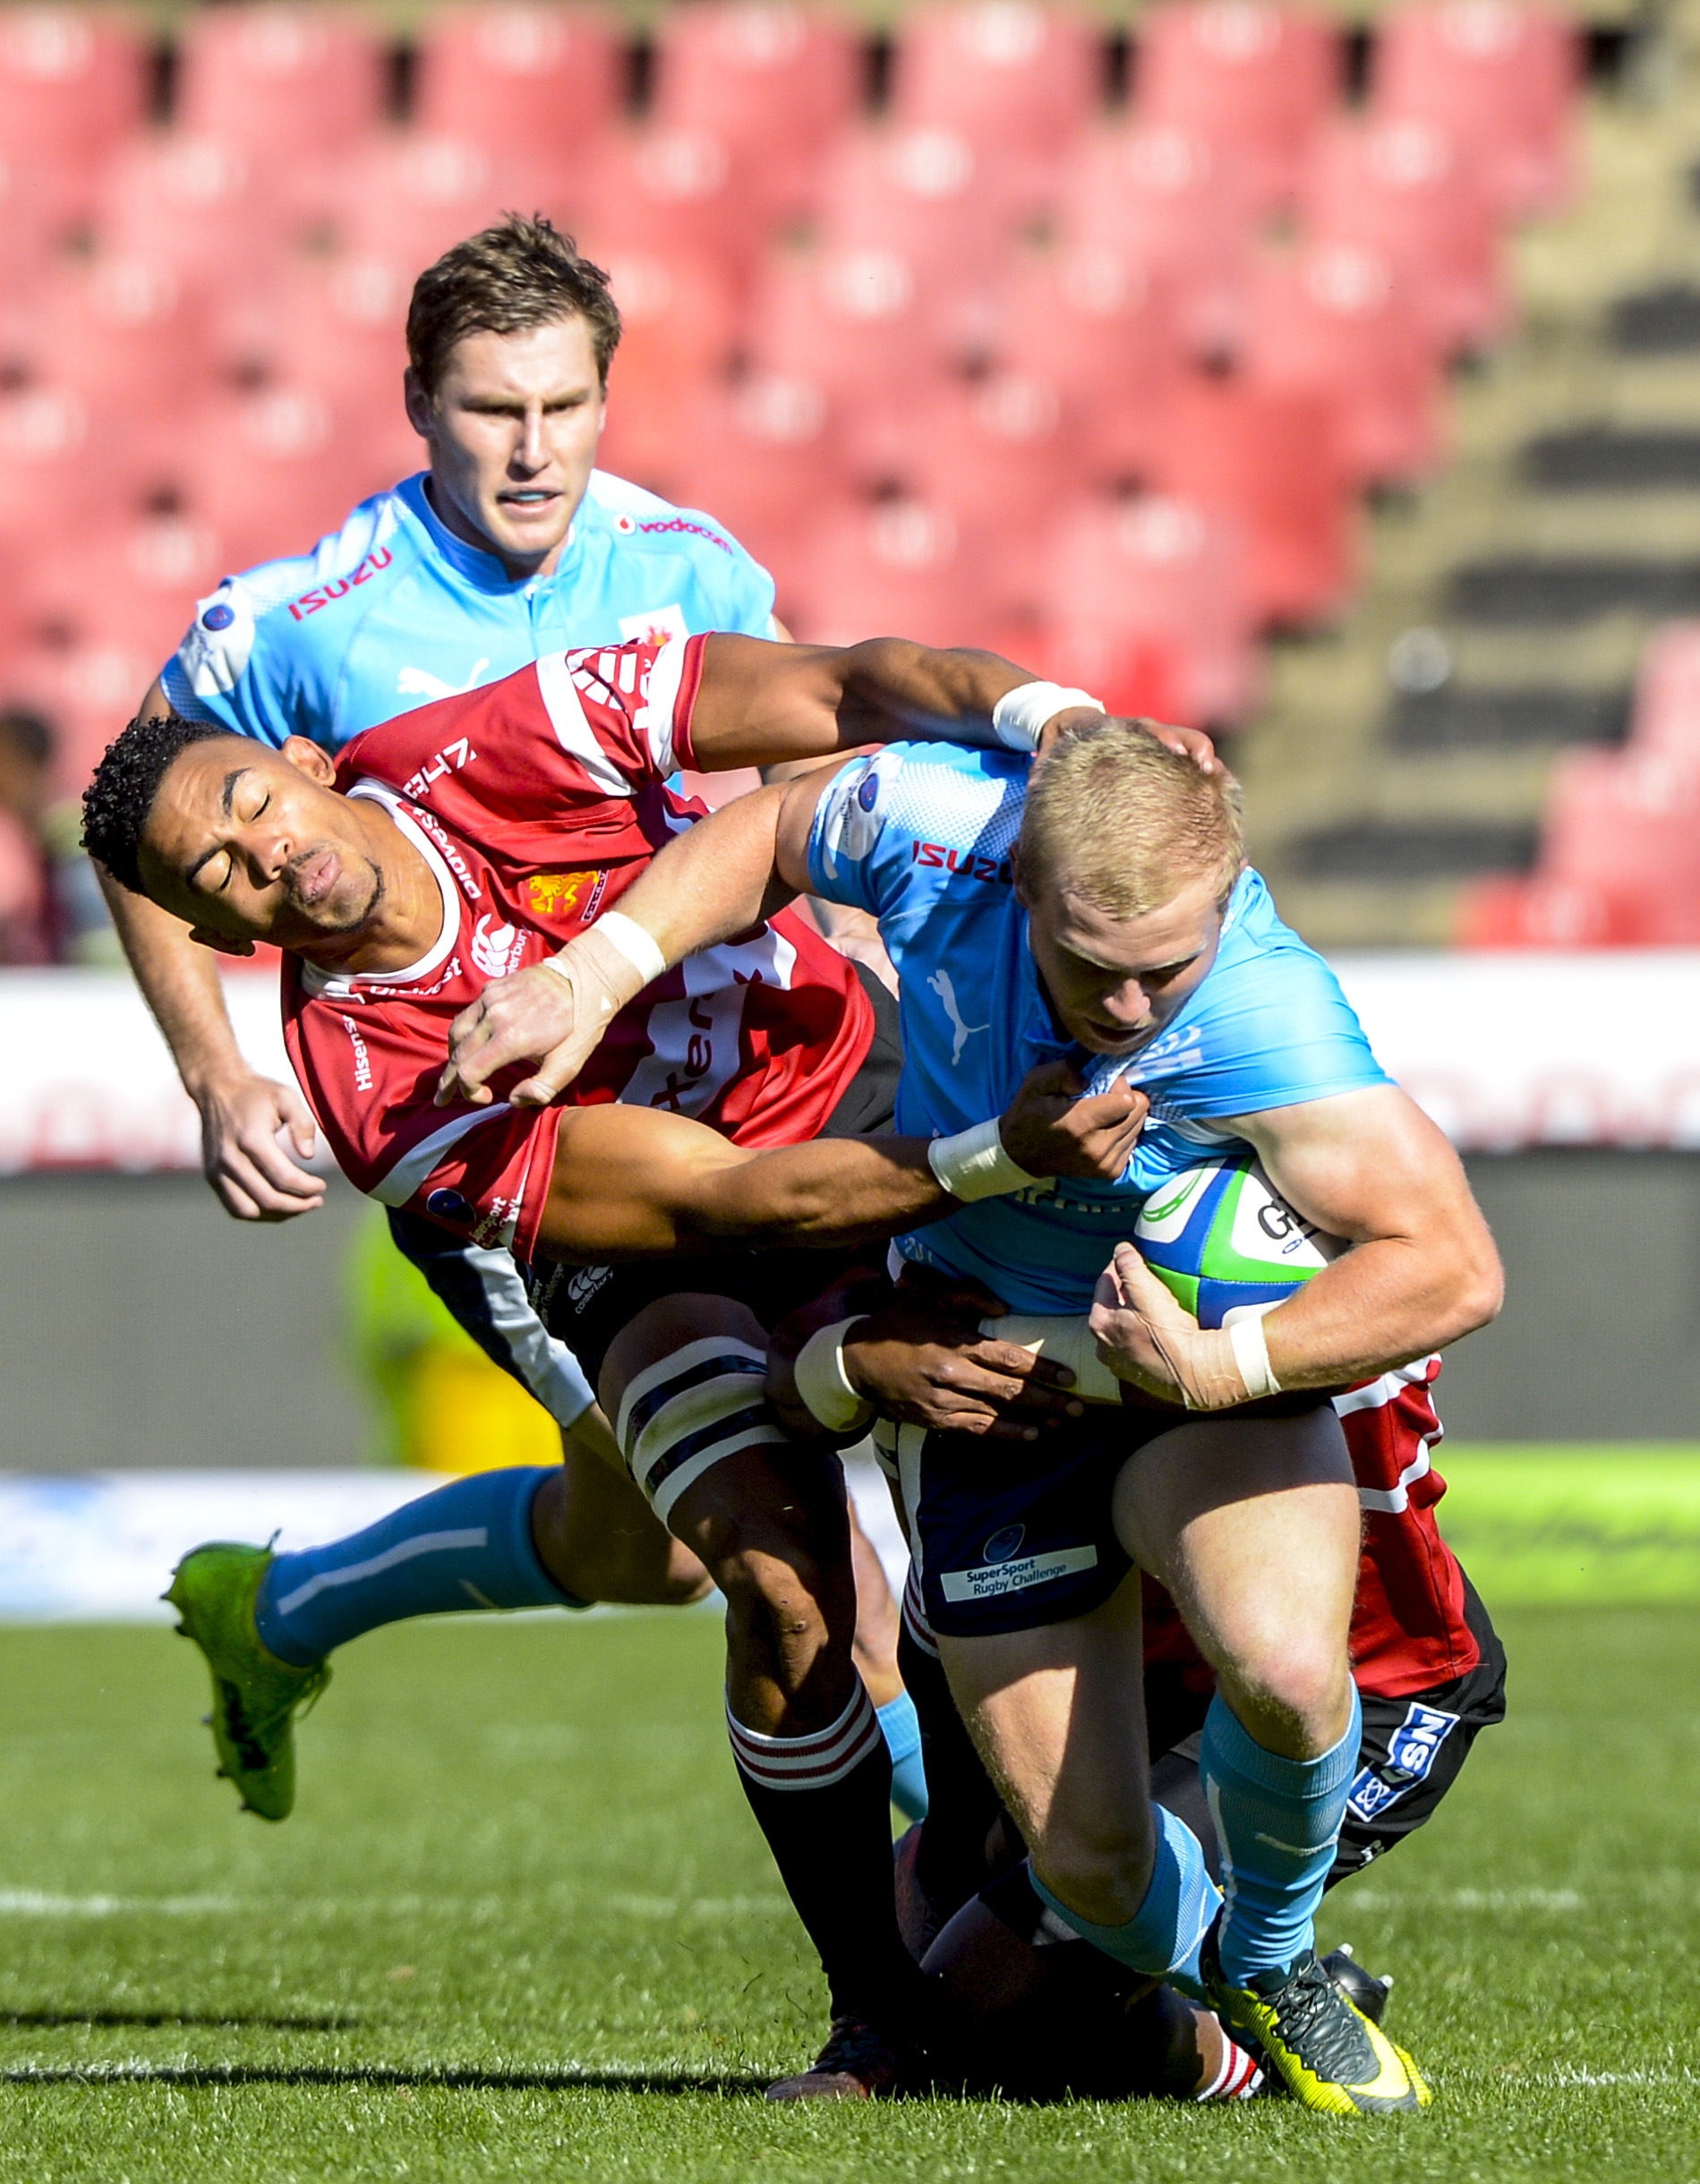 Tries galore and favourites toppled in SuperSport Rugby Challenge 15.co.za  Rugby News, Live Scores, Results, Fixtures